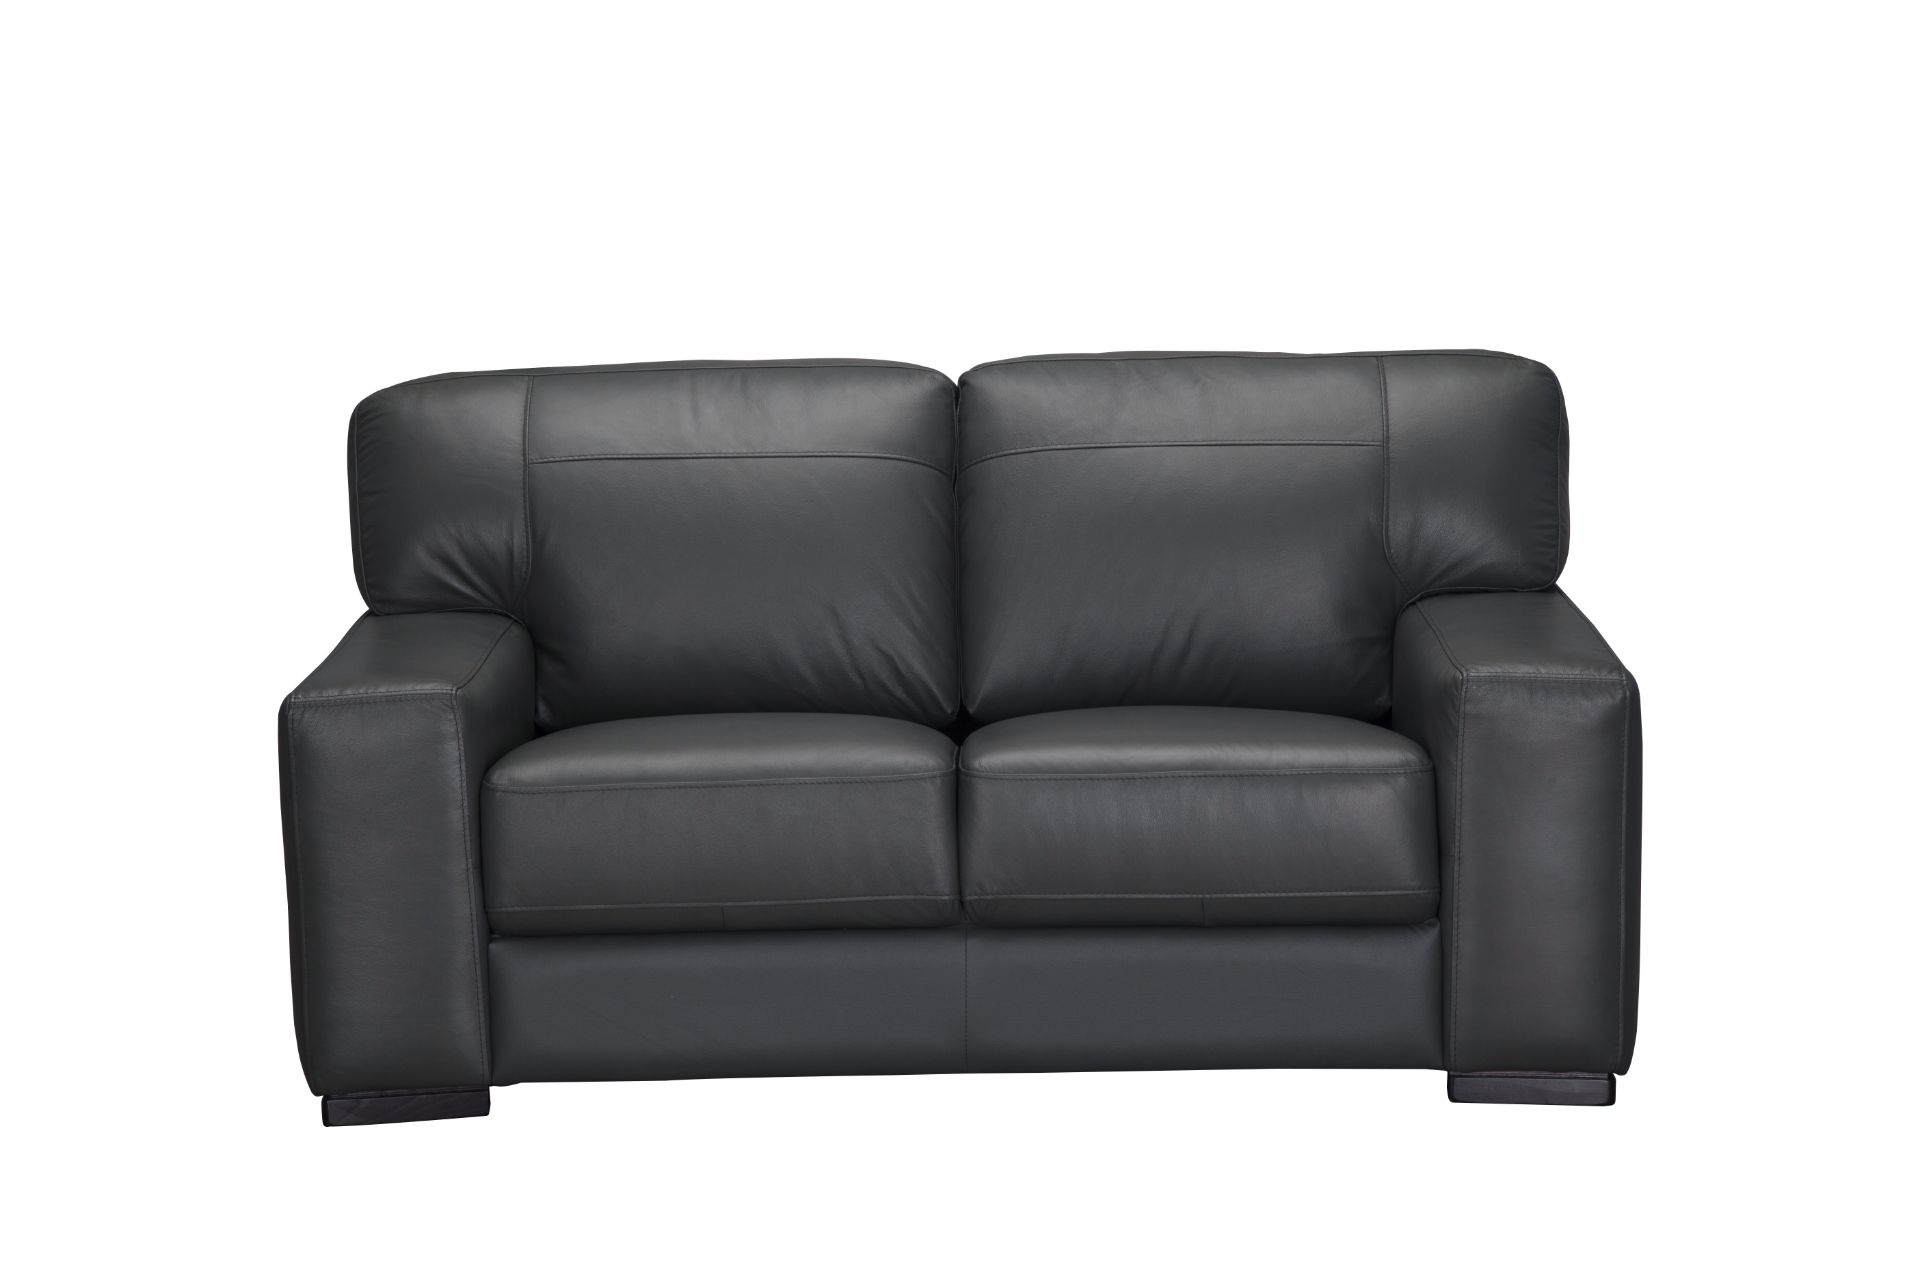 1x Brand New Fulham 2 Seater Static-Charcoal Leather Sofa & PVC Outer